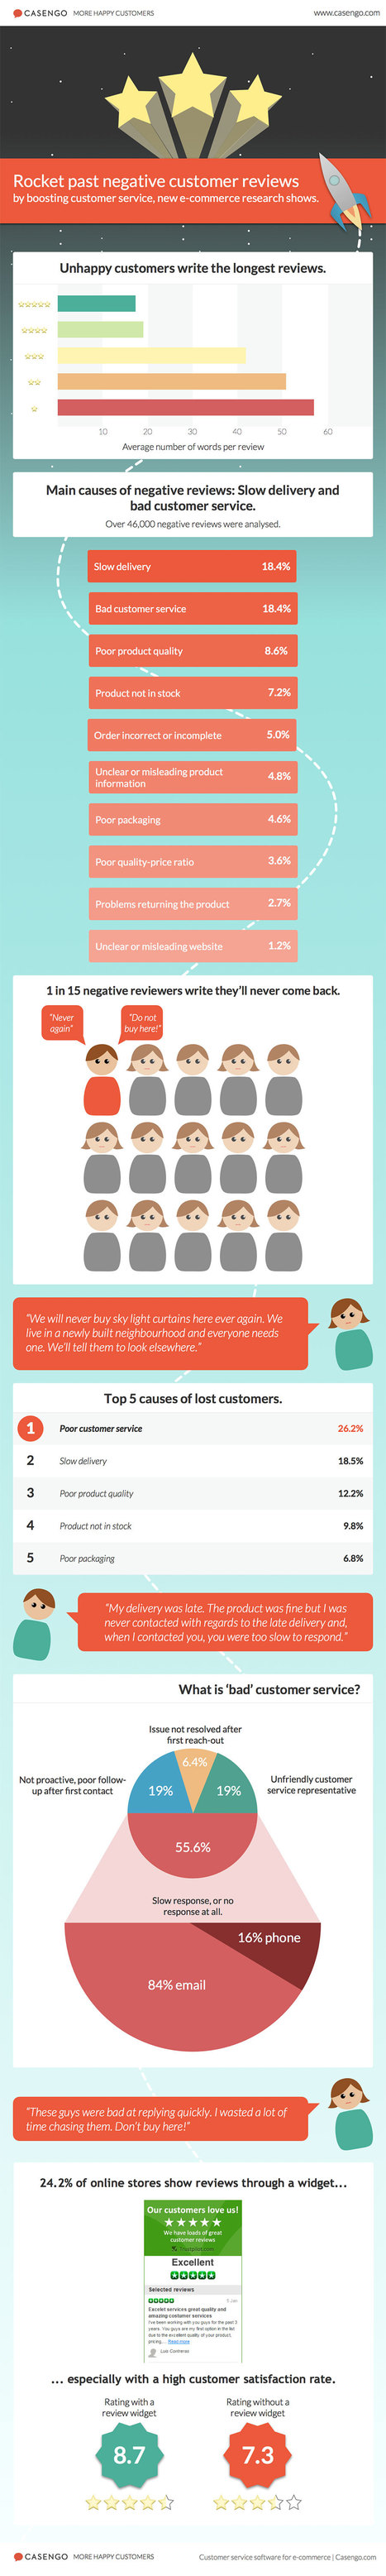 Why Bad Customer Experiences Happen - #Infographic | Design, Science and Technology | Scoop.it